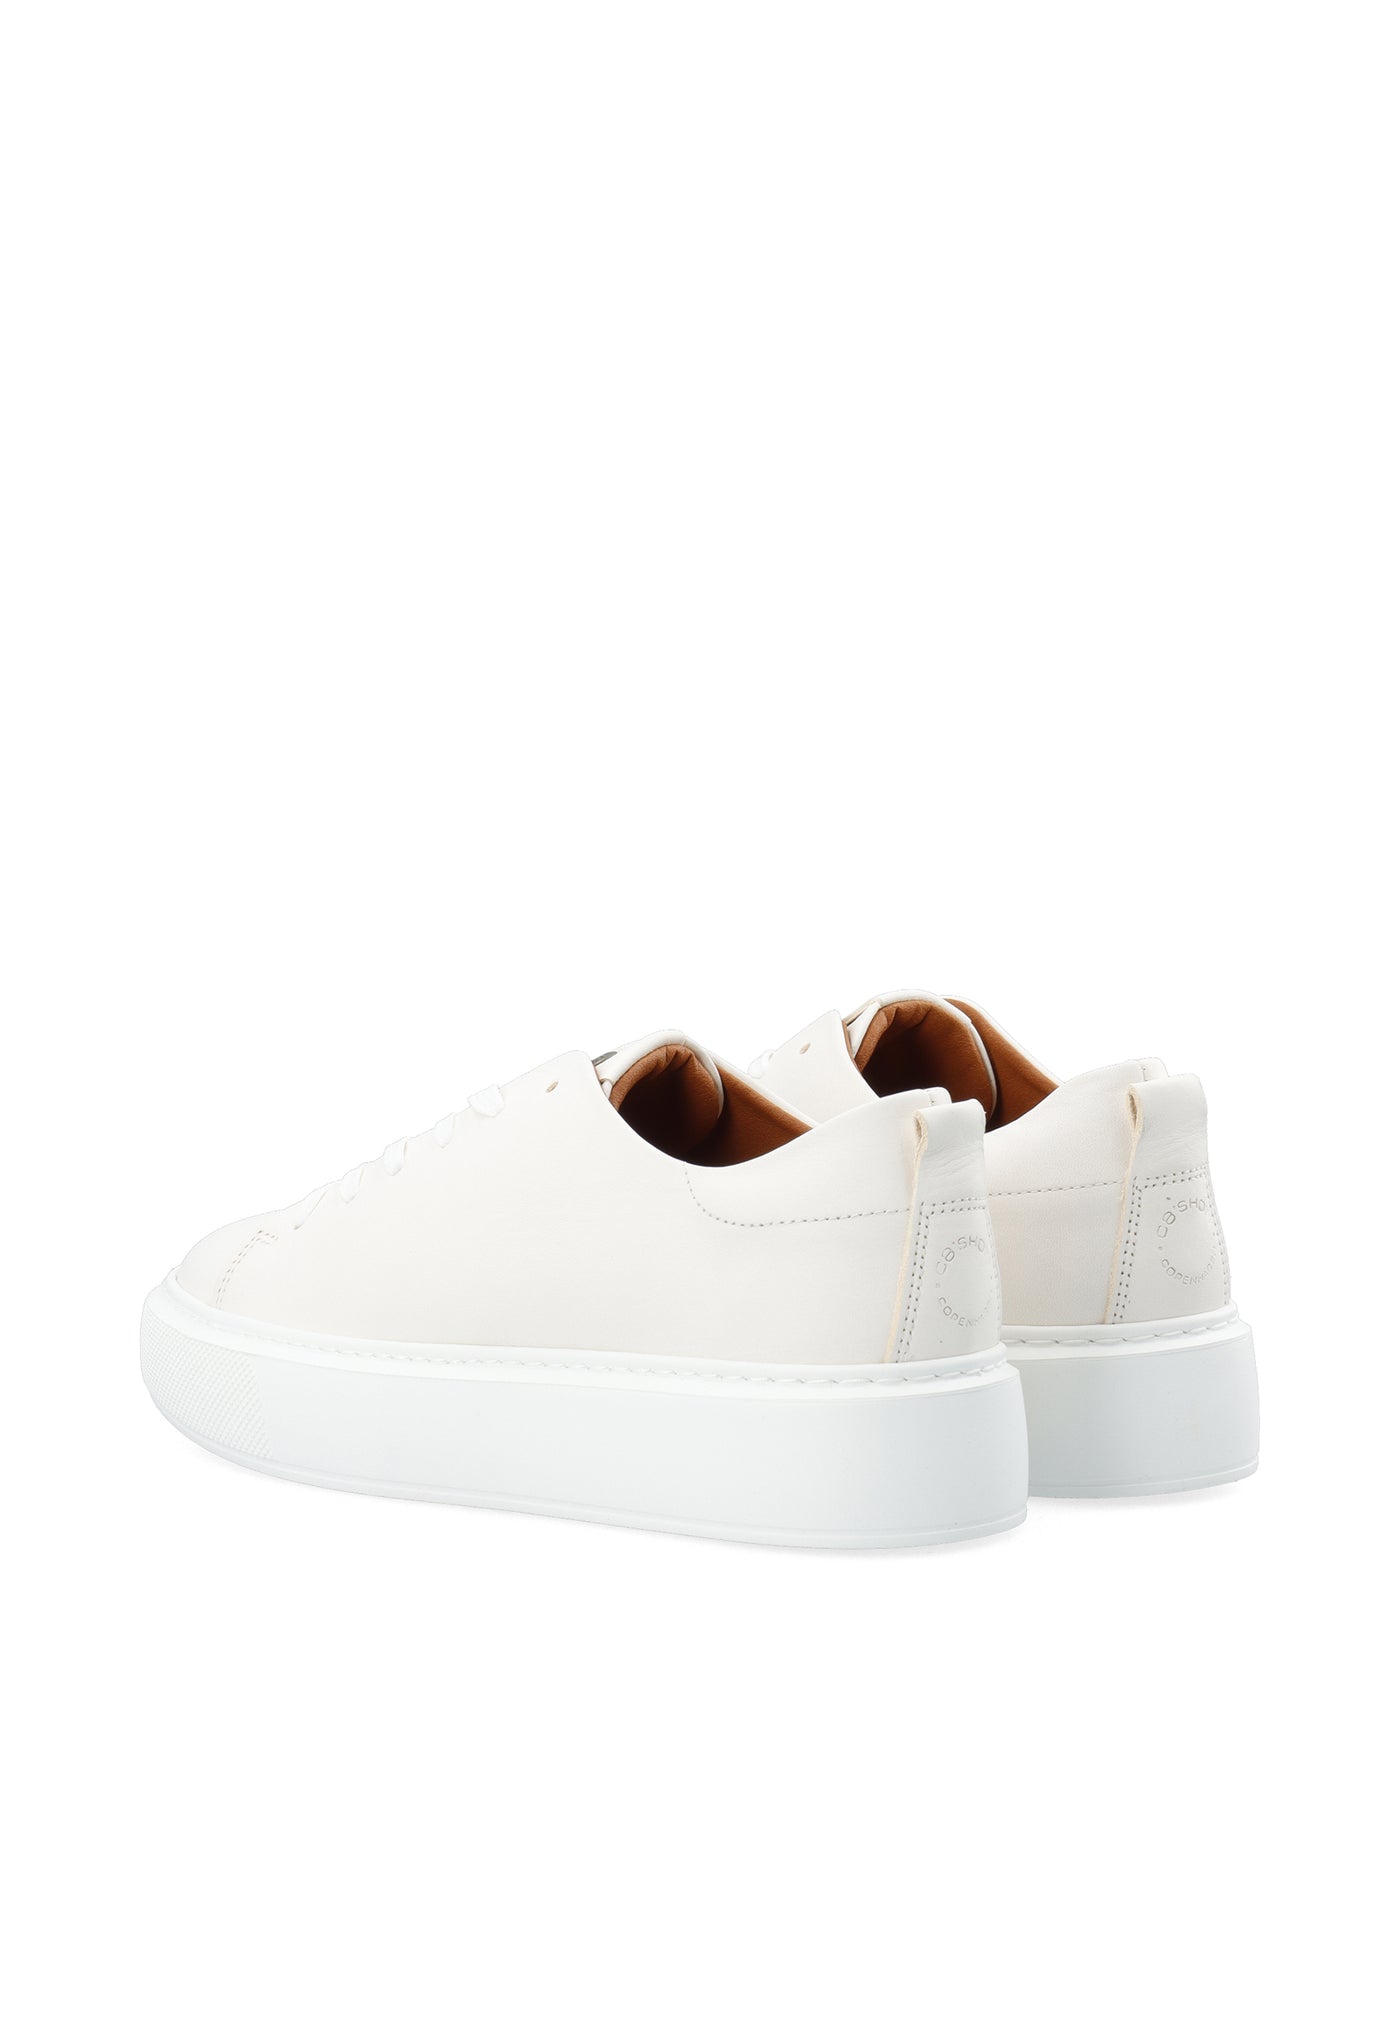 CASHOTT CASIDA Lace Shoe Leather Vegetable Tanned Low Sneakers White